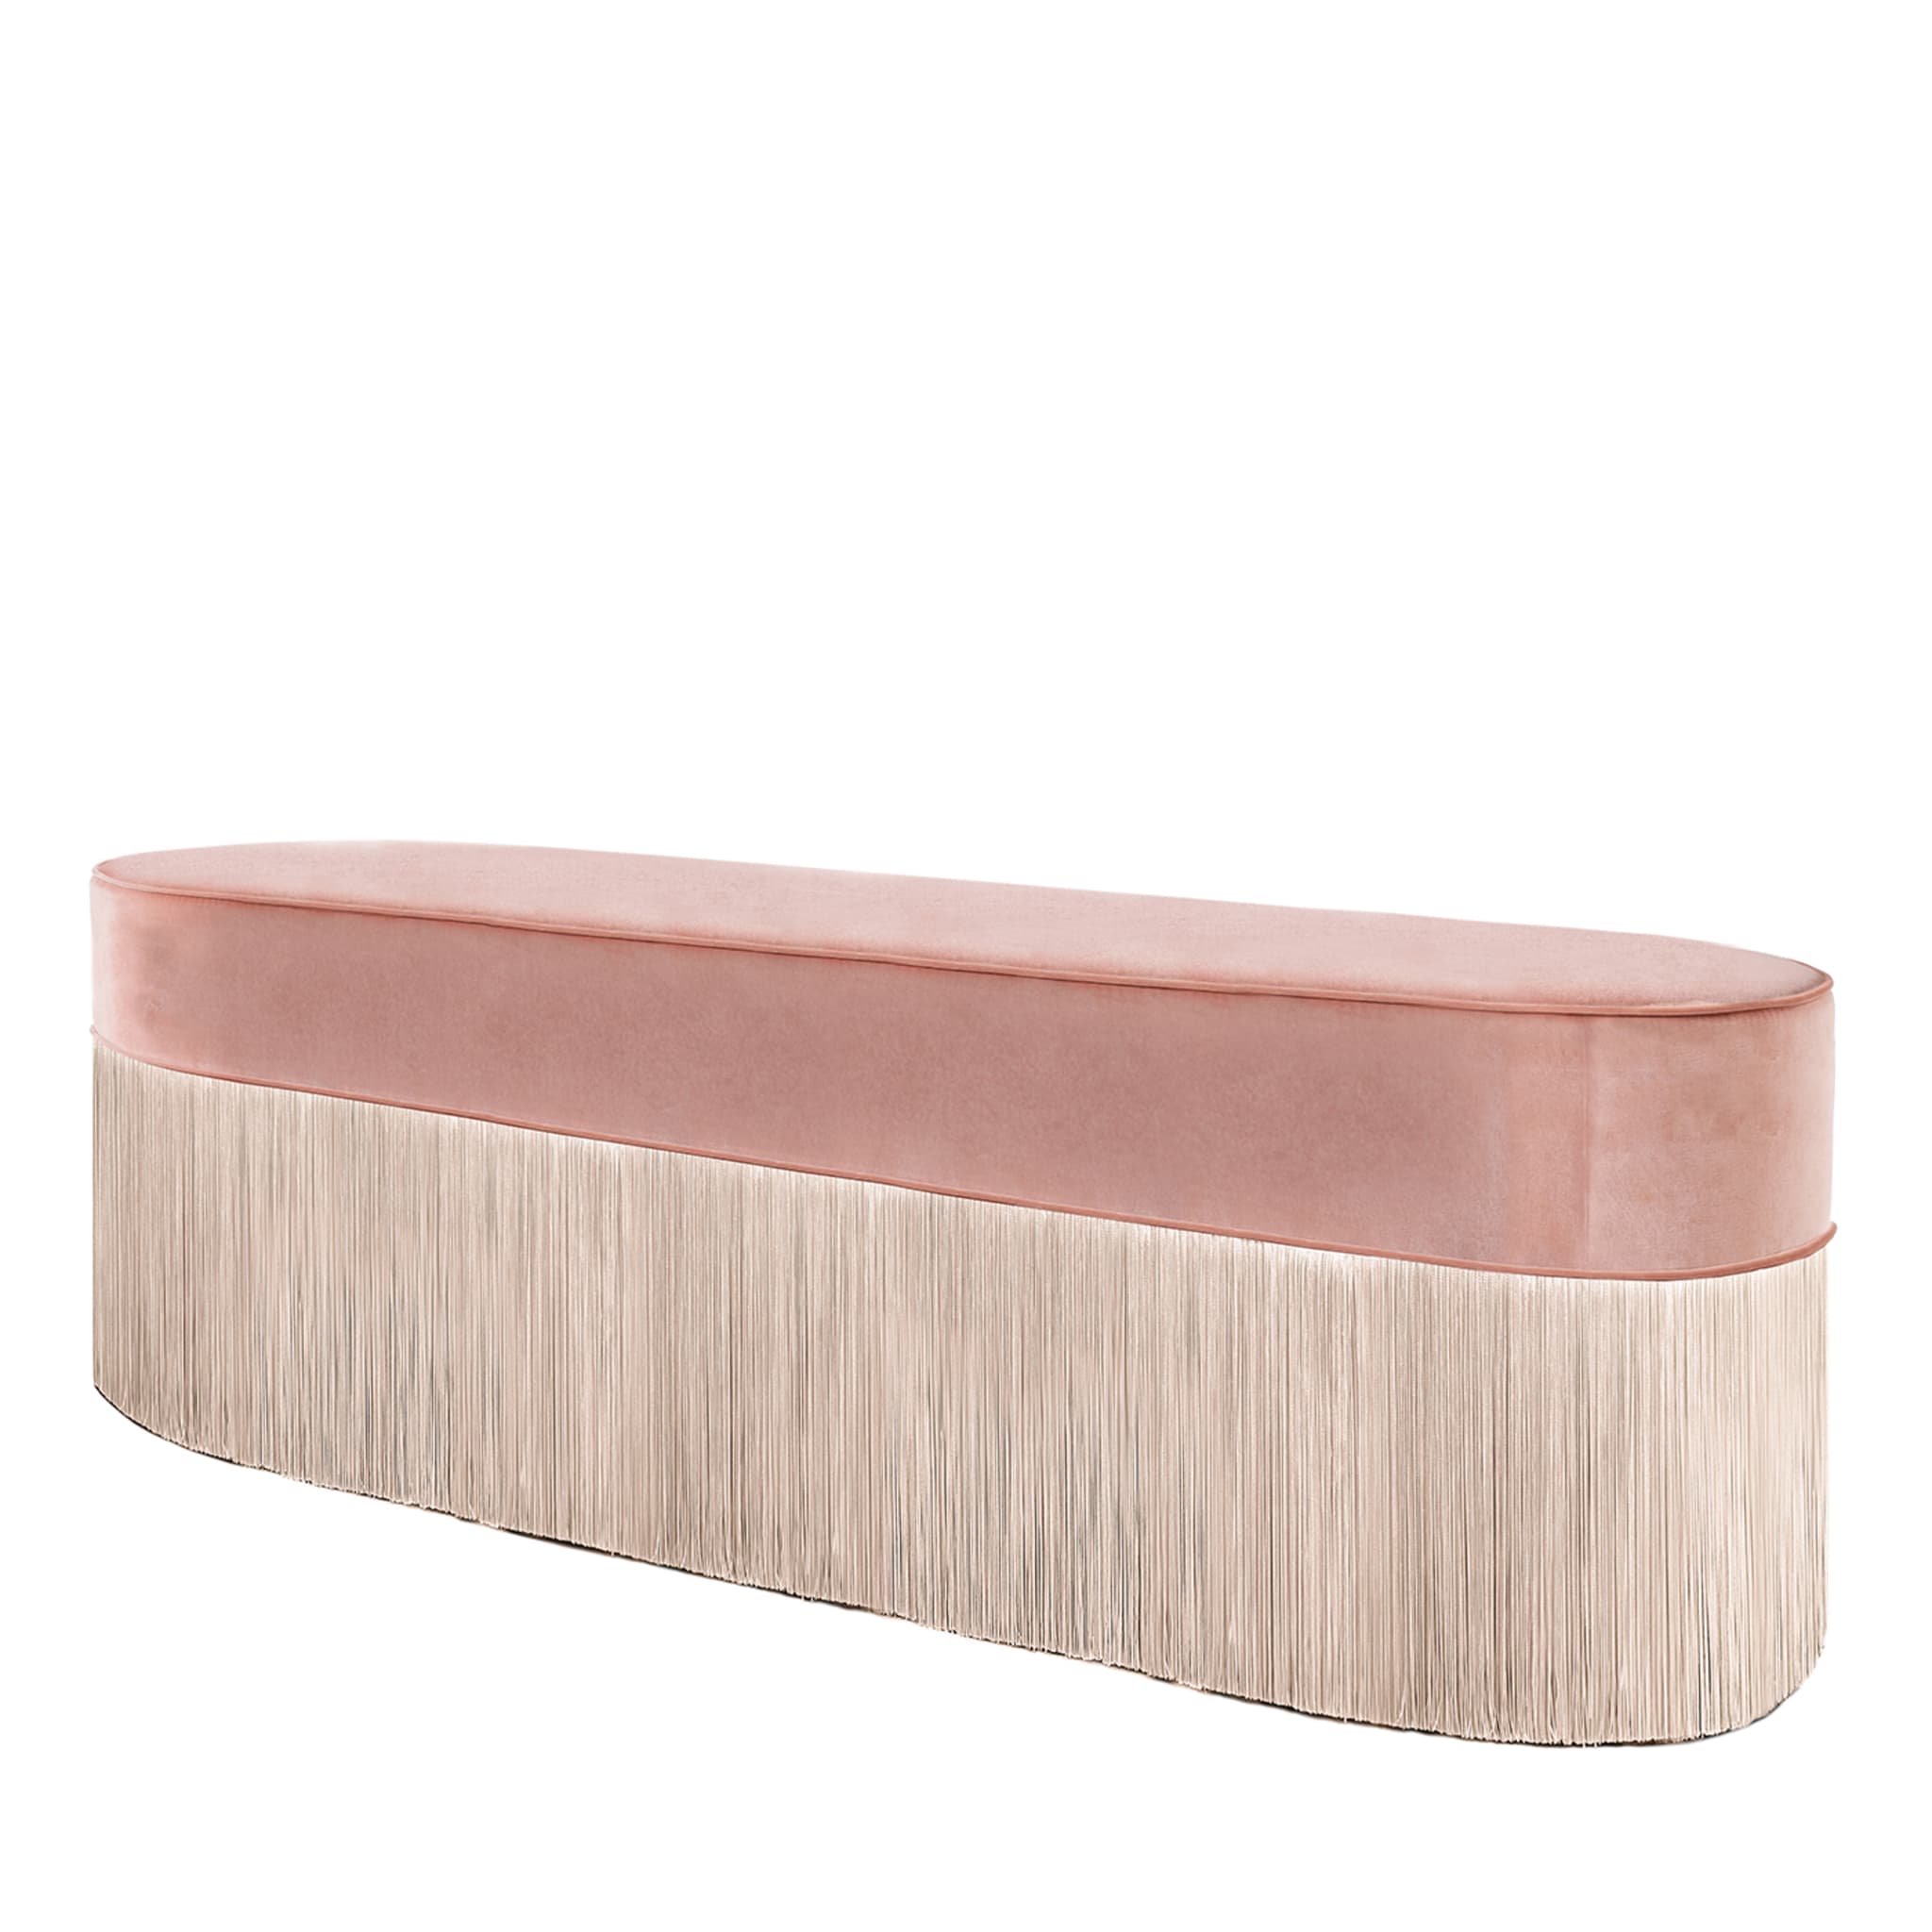 Fringed Pink Two-Toned Bench - Alternative view 2